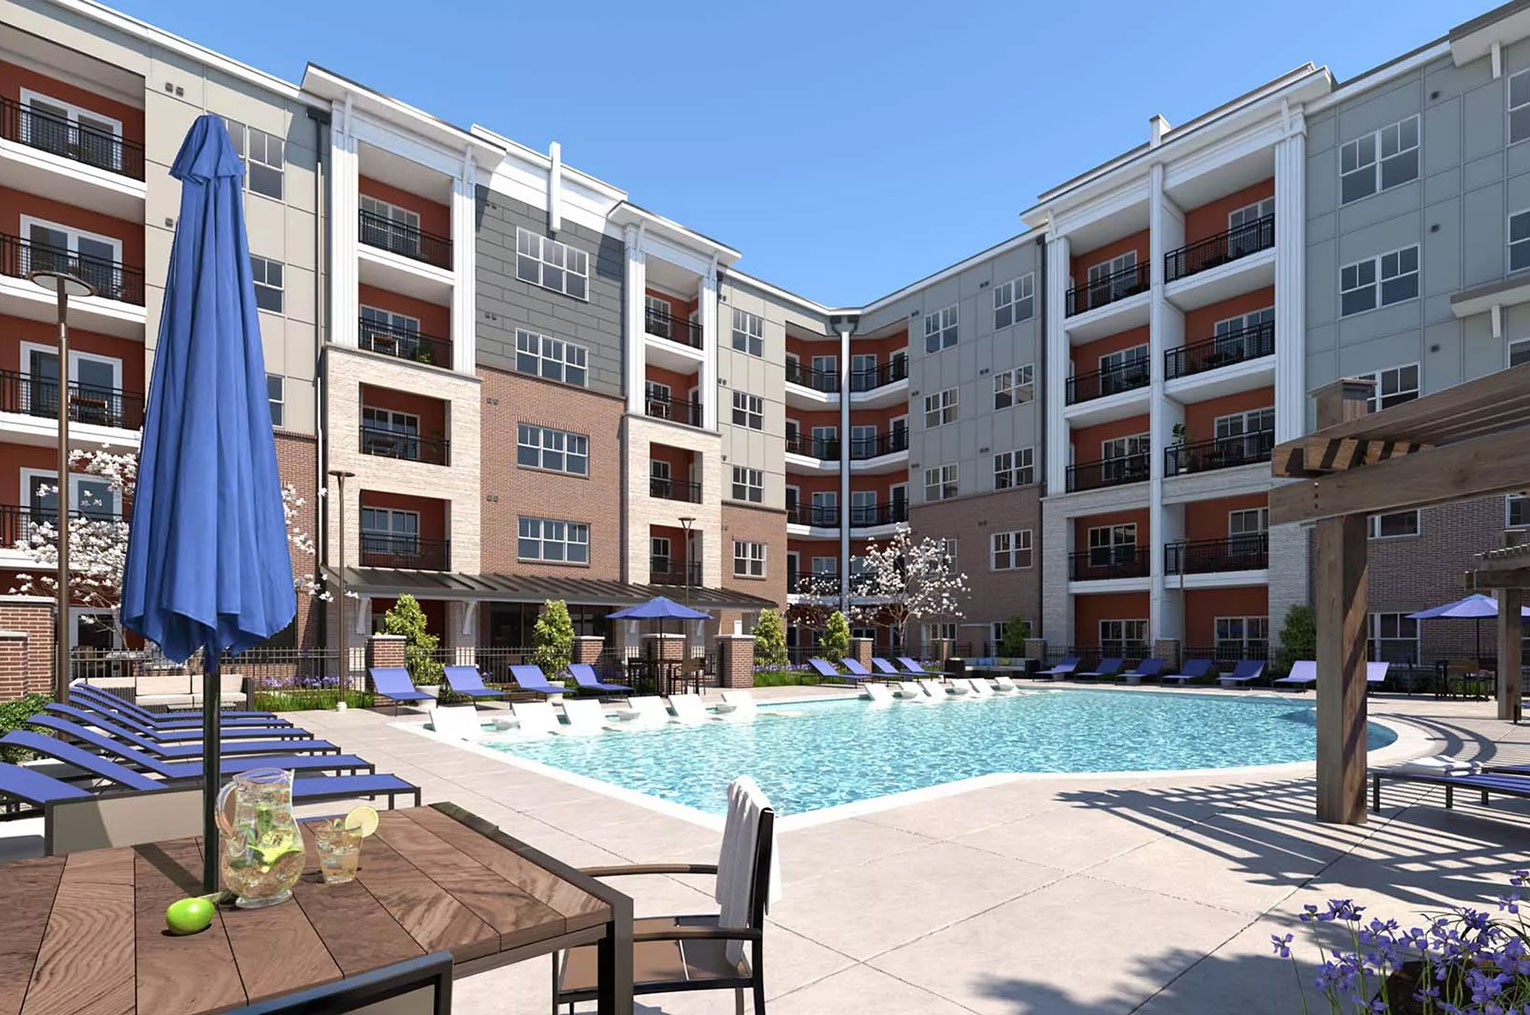 NorthPointe Apartments announces first move-ins during COVID-19 pandemic